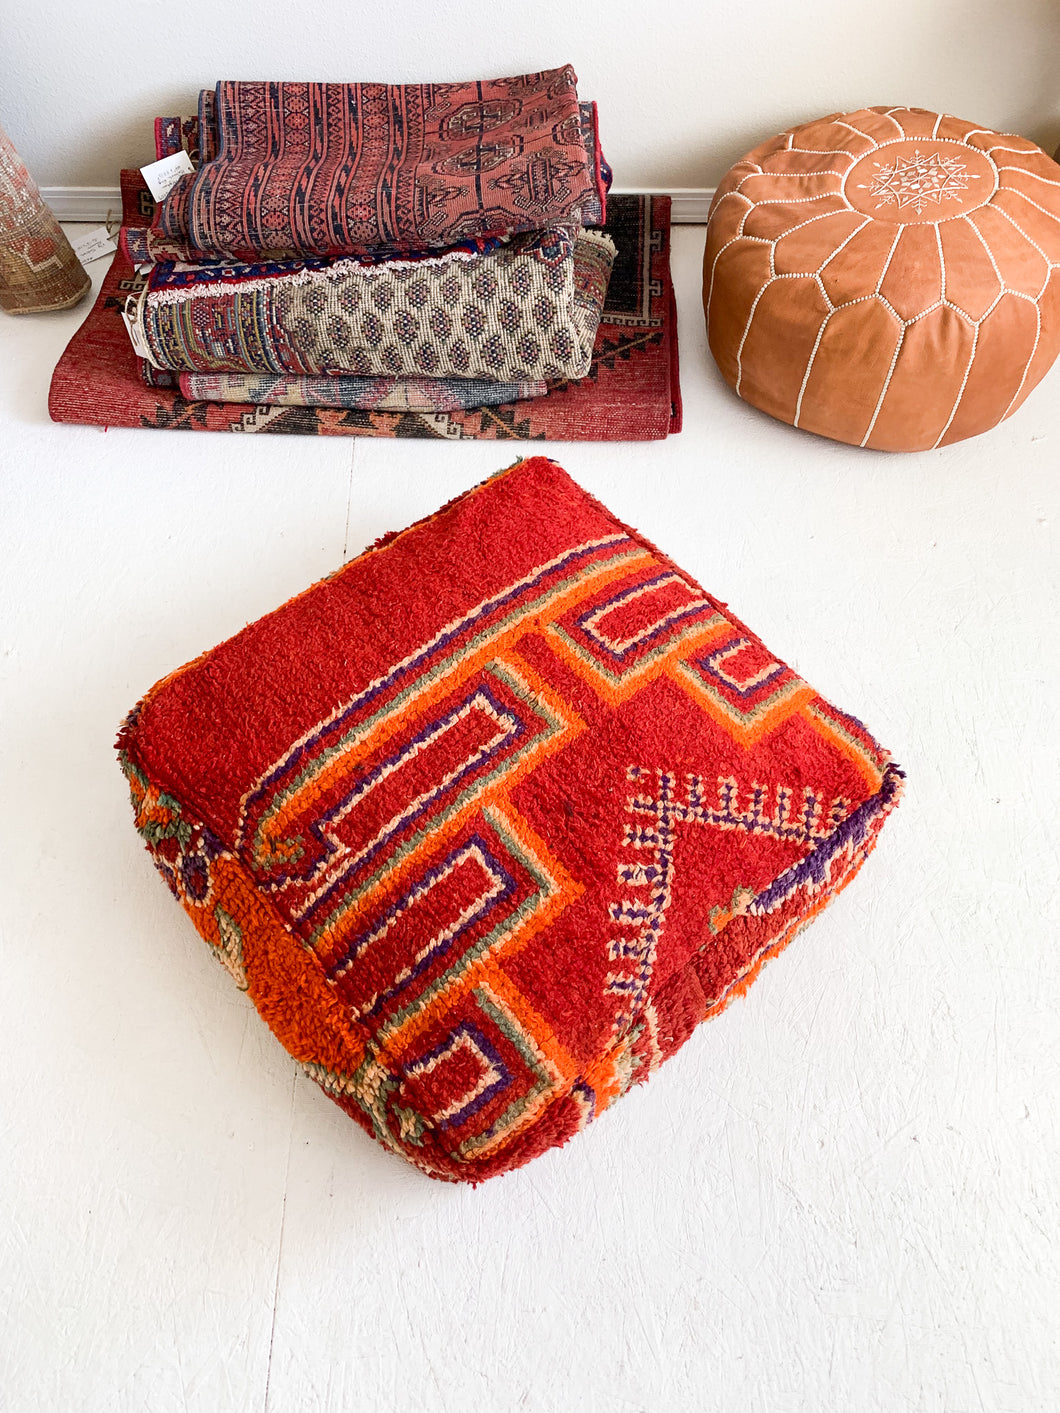 Reserved for Monique - Moroccan Rug Floor Pouf / Pet Bed #349